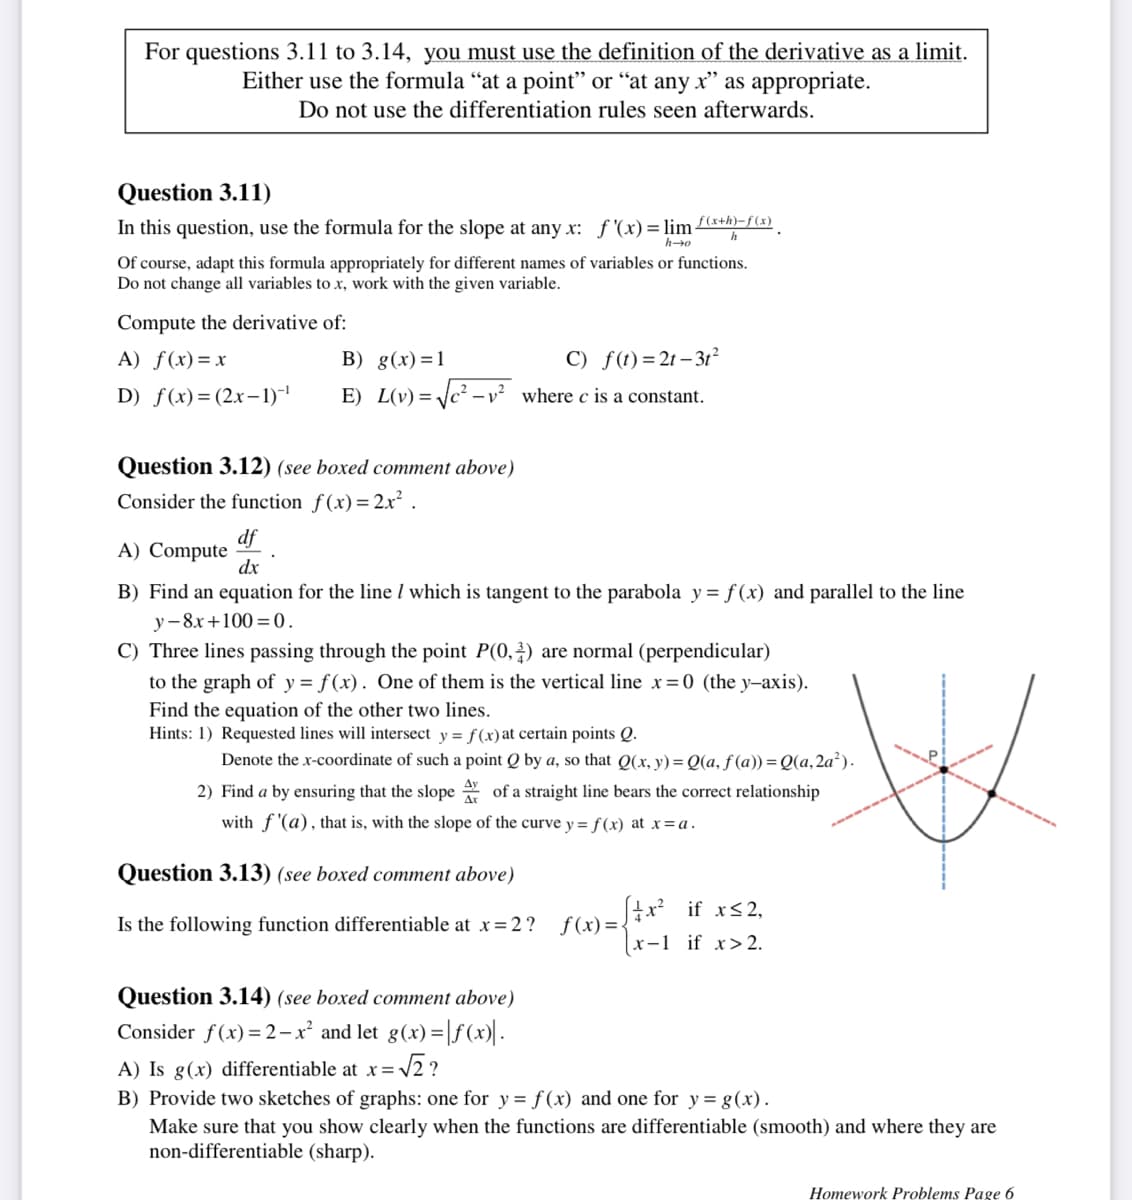 For questions 3.11 to 3.14, you must use the definition of the derivative as a limit.
Either use the formula "at a point" or "at any x" as appropriate.
Do not use the differentiation rules seen afterwards.
Question 3.11)
In this question, use the formula for the slope at any x: f '(x) = lim f(x+h)-f(x)
h
h-o
Of course, adapt this formula appropriately for different names of variables or functions.
Do not change all variables to x, work with the given variable.
Compute the derivative of:
A) f(x)=x
B) g(x)=1
D) f(x) = (2x-1)-¹ E) L(v)=√√c²-
Question 3.12) (see boxed comment above)
Consider the function f(x) = 2x².
C) f(t)=2t-3t²
where c is a constant.
df
A) Compute
dx
B) Find an equation for the line / which is tangent to the parabola y = f(x) and parallel to the line
y-8x+100=0.
C) Three lines passing through the point P(0,2) are normal (perpendicular)
to the graph of y = f(x). One of them is the vertical line x=0 (the y-axis).
Find the equation of the other two lines.
Hints: 1) Requested lines will intersect y = f(x) at certain points Q.
Denote the x-coordinate of such a point Q by a, so that Q(x, y) =Q(a, f(a)) = Q(a, 2a²).
2) Find a by ensuring that the slope of a straight line bears the correct relationship
with f'(a), that is, with the slope of the curve y= f(x) at x =a.
Question 3.13) (see boxed comment above)
Is the following function differentiable at x = 2?
[x² if x≤2,
c)=√x-1 if x>2.
3
Question 3.14) (see boxed comment above)
Consider f(x) = 2x² and let g(x)=f(x)|.
x=√√2?
A) Is g(x) differentiable at x =
B) Provide two sketches of graphs: one for y = f(x) and one for y= g(x).
Make sure that you show clearly when the functions are differentiable (smooth) and where they are
non-differentiable (sharp).
Homework Problems Page 6